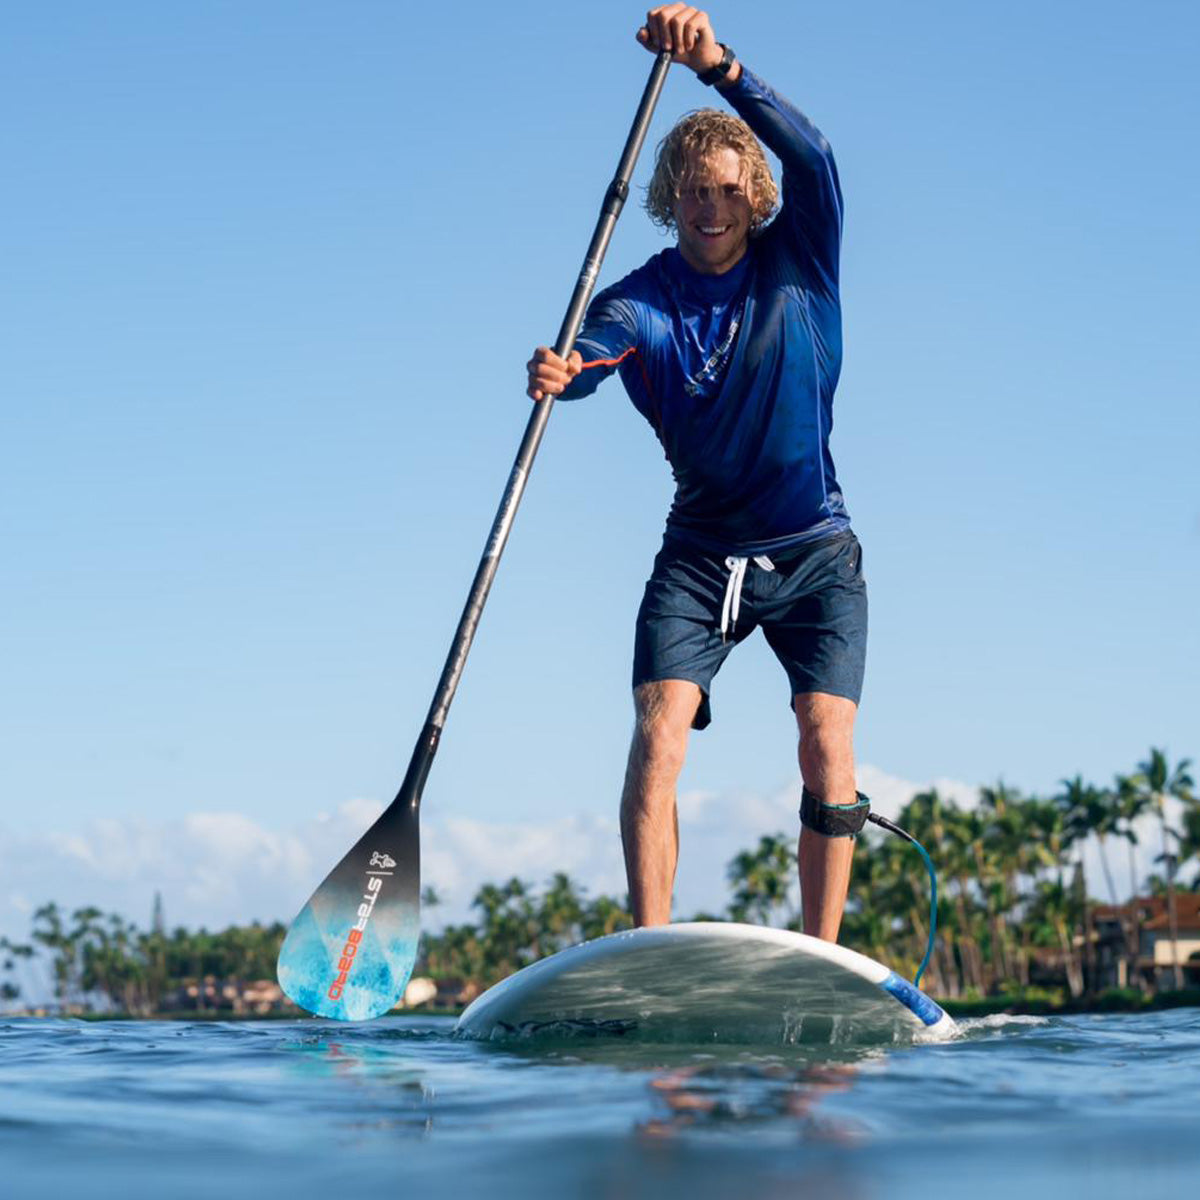 Starboard Wide Ride - SUP